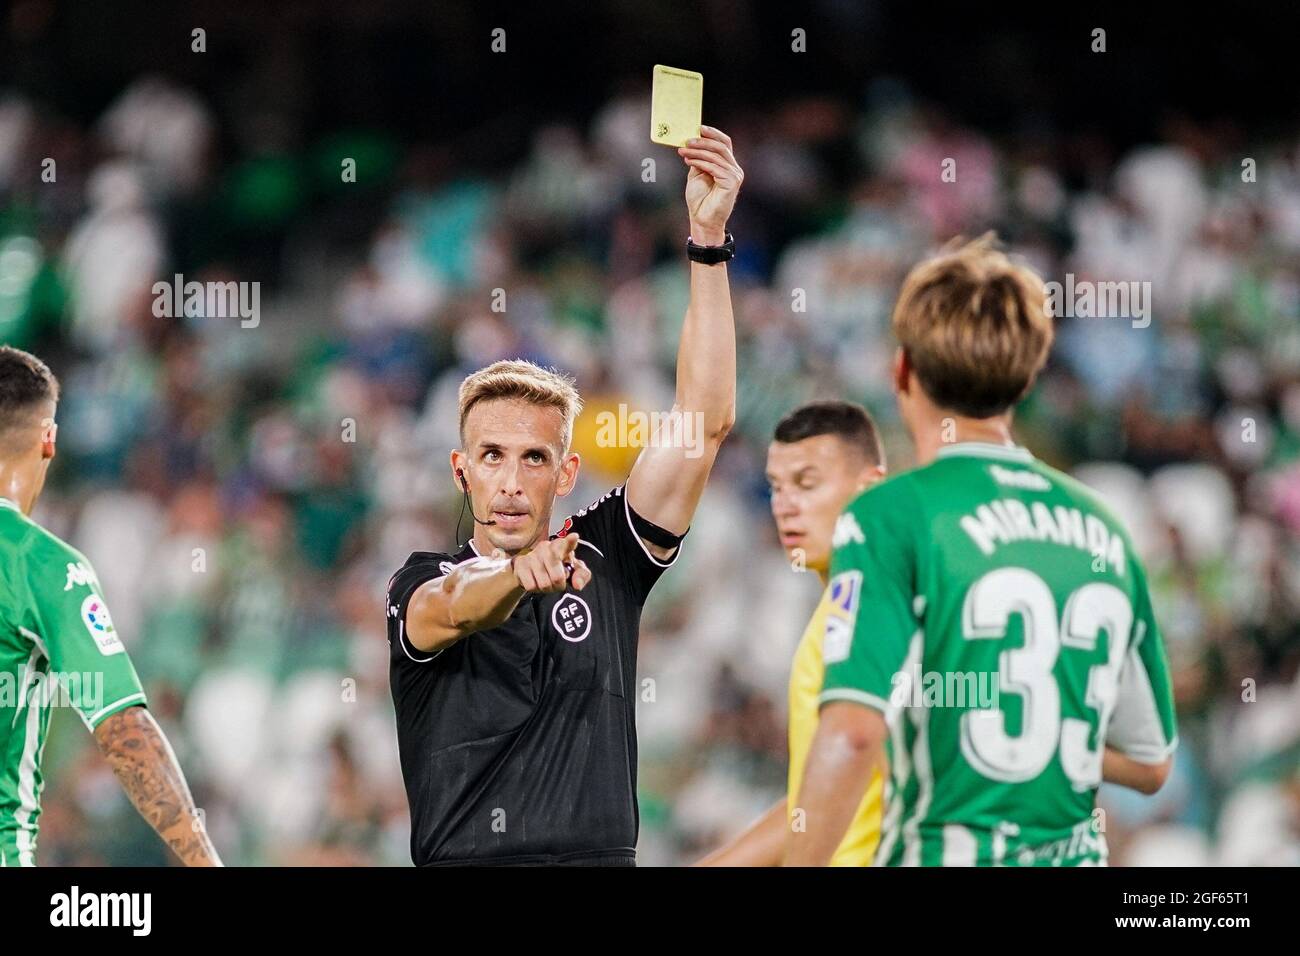 Seville, Spain. 20th Aug, 2021. Referee Valentin Pizarro Gome displays a yellow card during the La Liga Santander 2021/2022 soccer match between Real Betis Balompie and Cadiz CF at Benito Villamarin Stadium in Seville. (Final Score; Real Betis 1:1 Cadiz CF) Credit: SOPA Images Limited/Alamy Live News Stock Photo